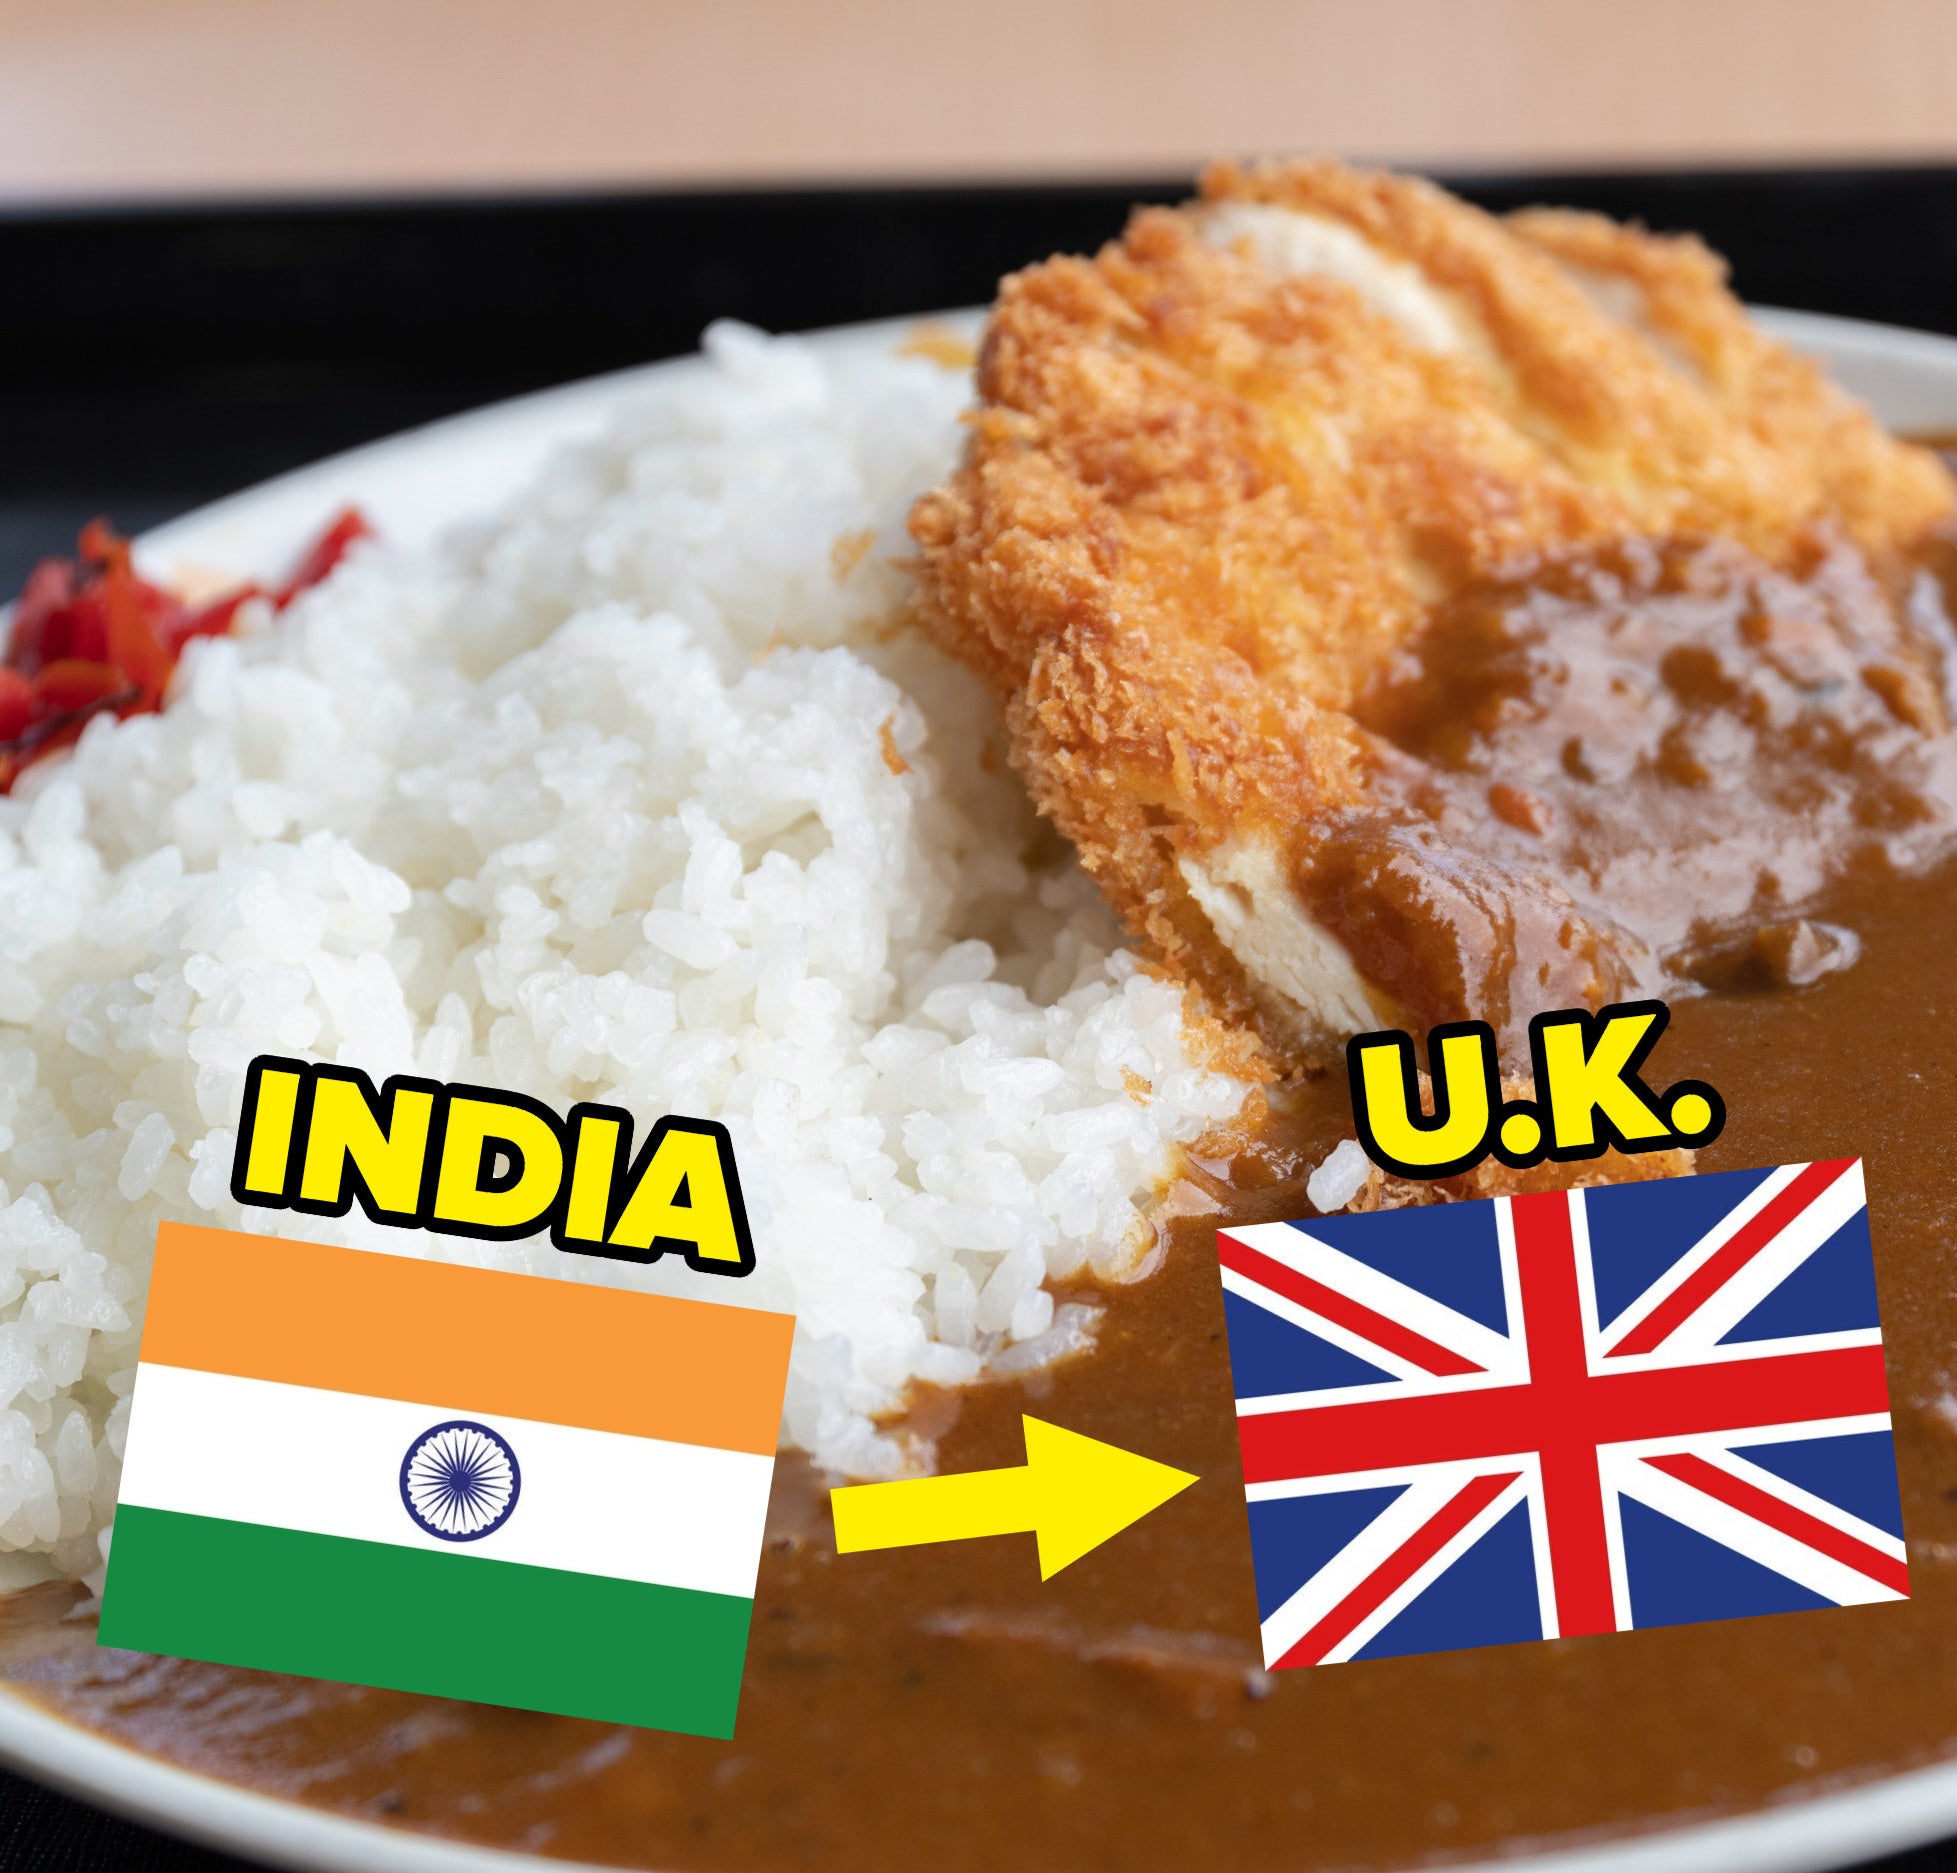 a plate of Japanese curry with the Indian and British flag images by it